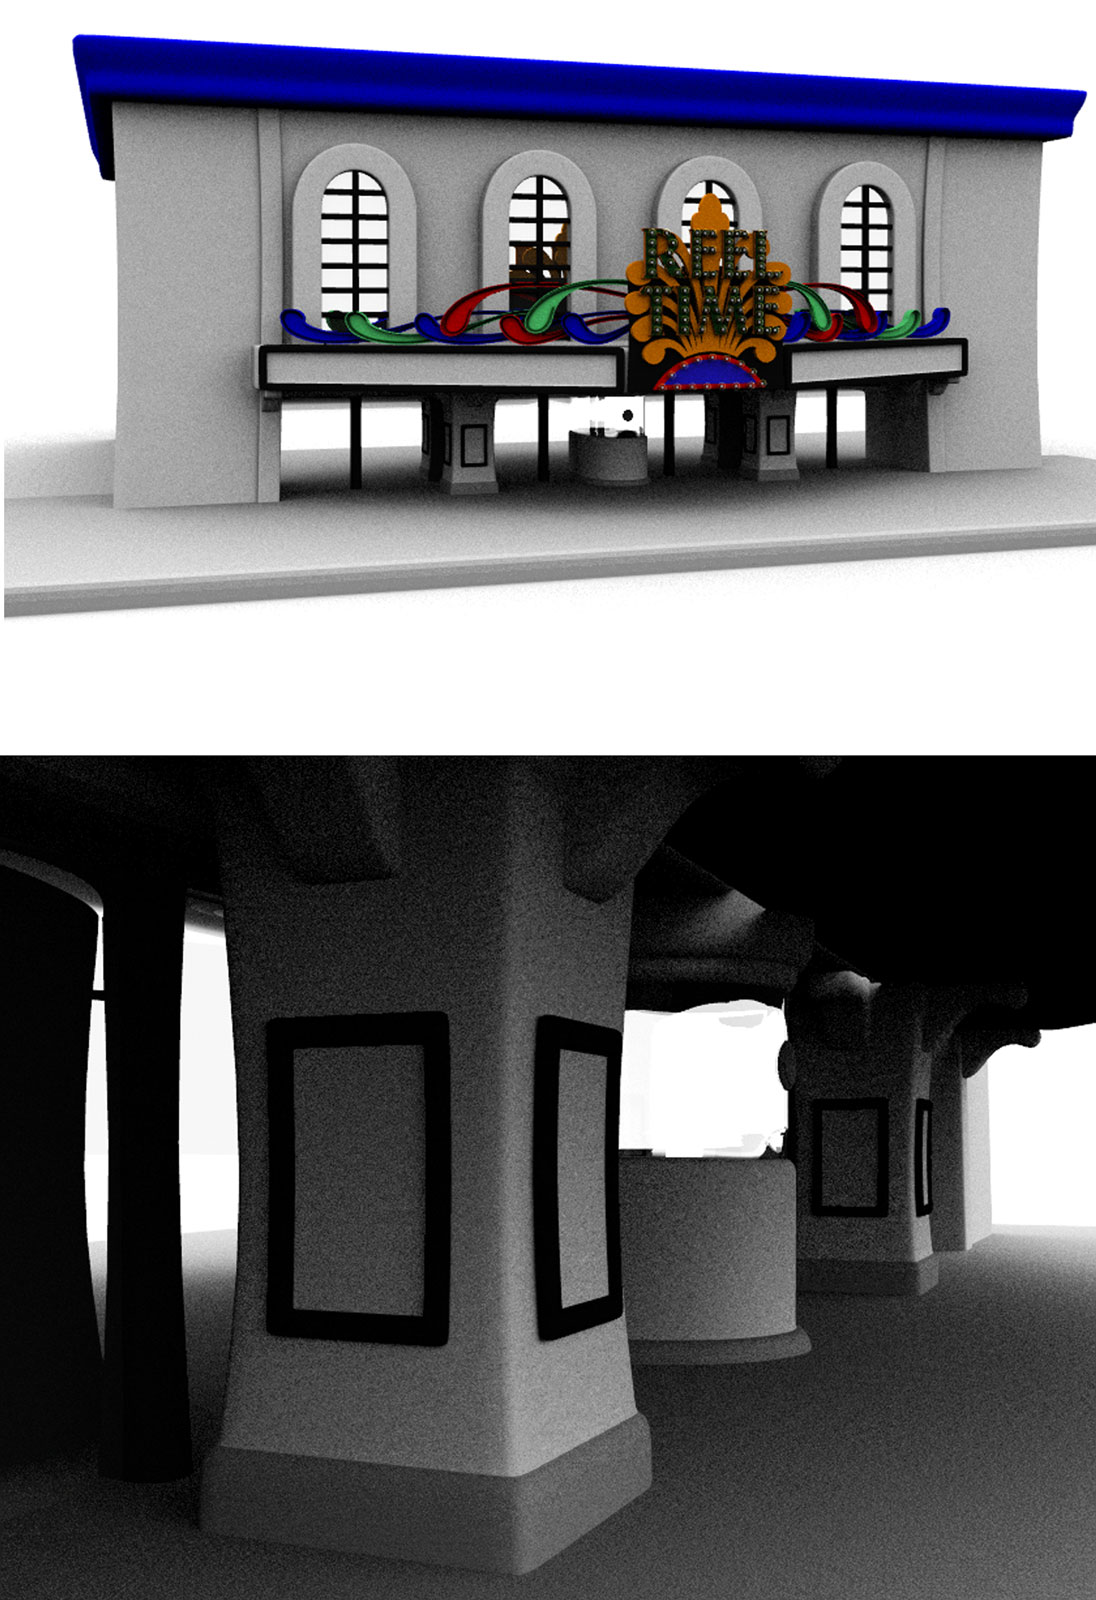 3D rendering of Reel Time Theater